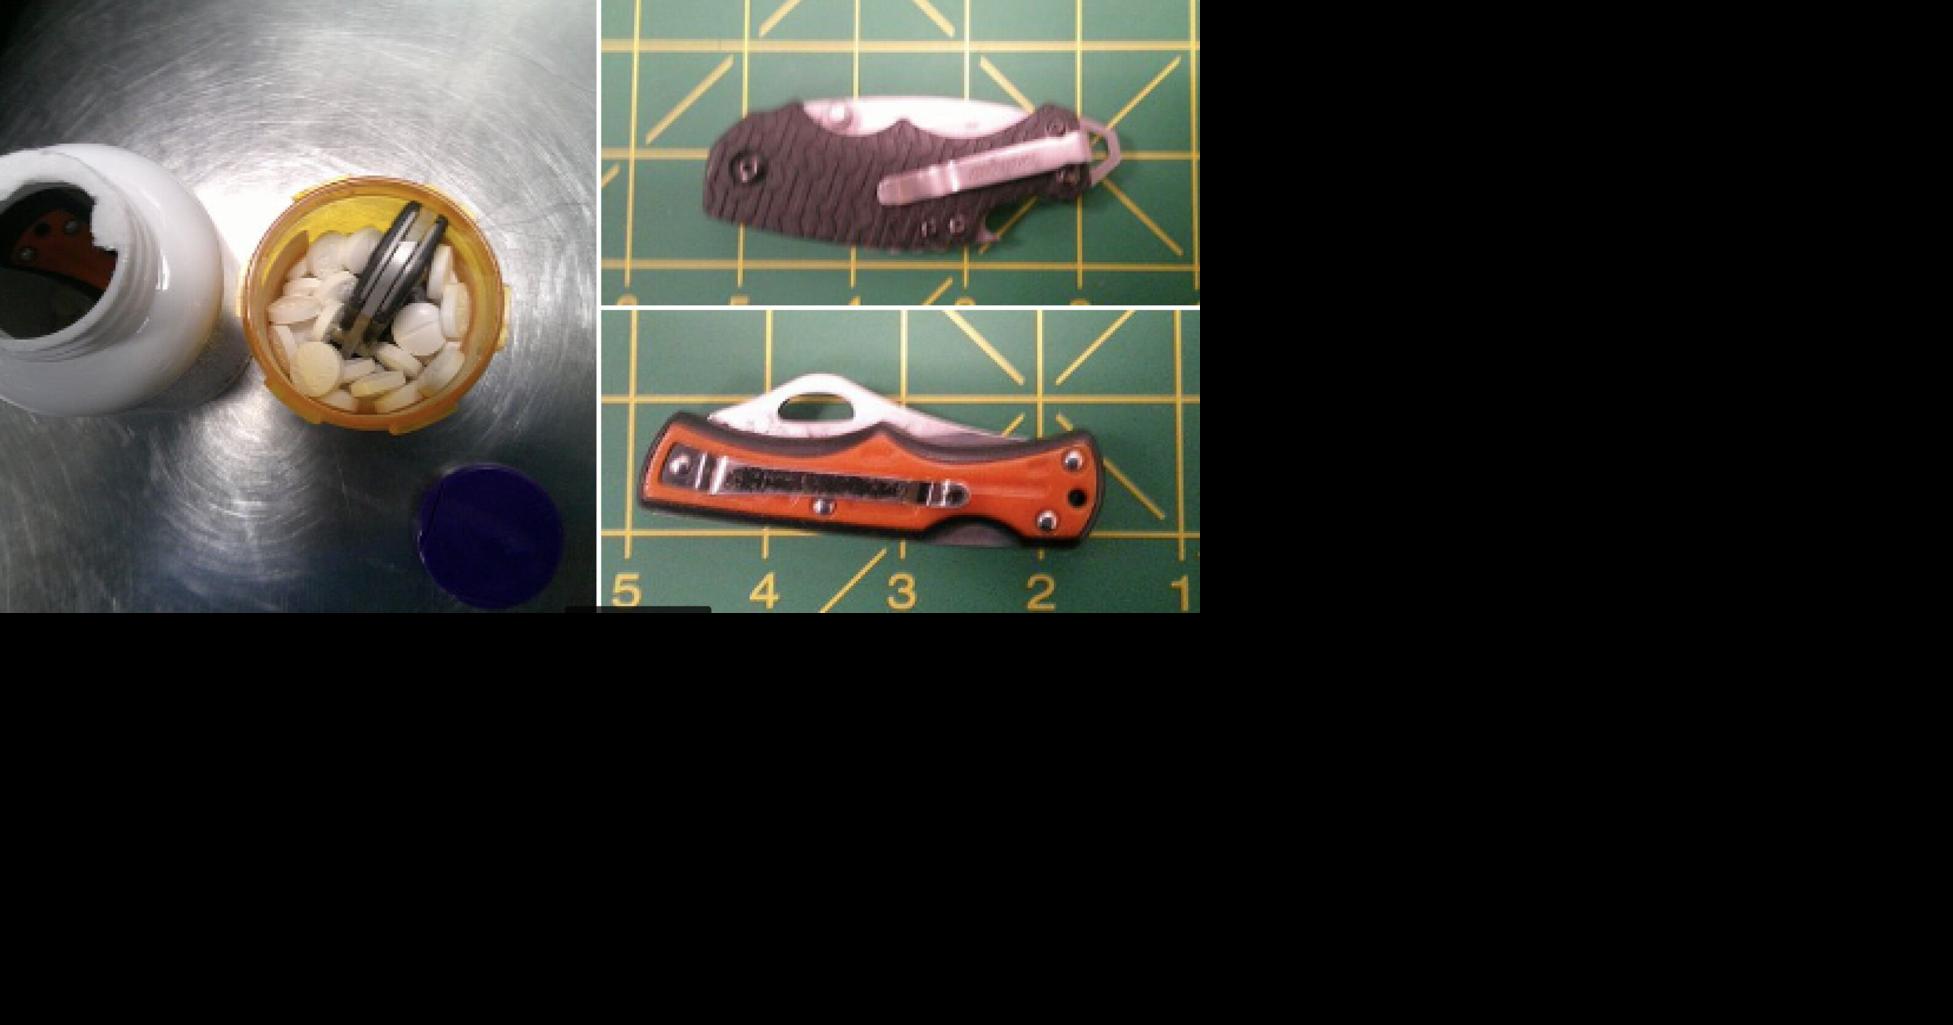 TSA officers discovered two knives concealed in pill bottles and rolled up clothing at LWS